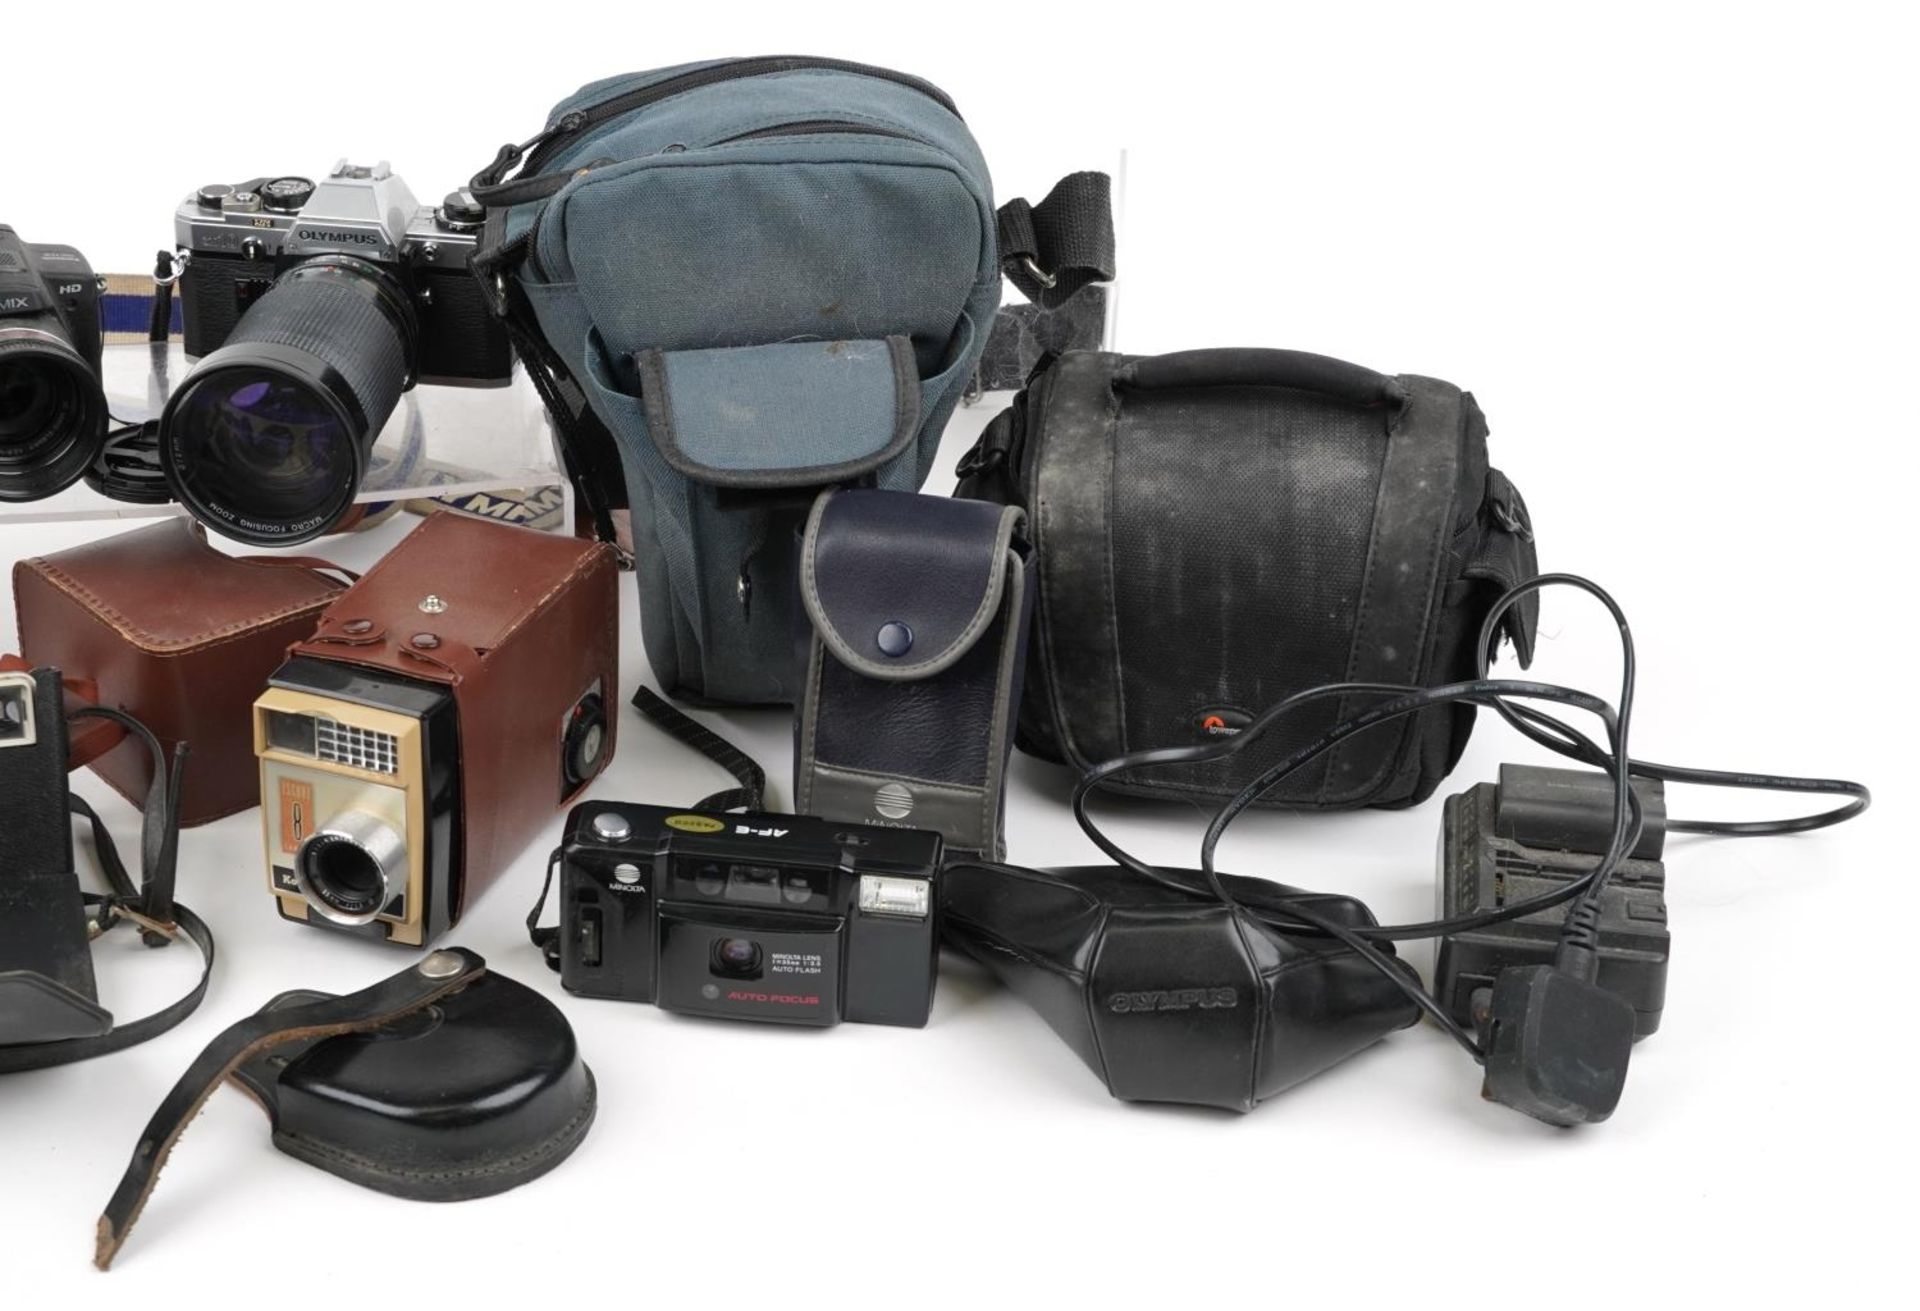 Vintage and later cameras, lenses and accessories including Olympus OM10 with Vivitar 28-210mm lens, - Image 3 of 3